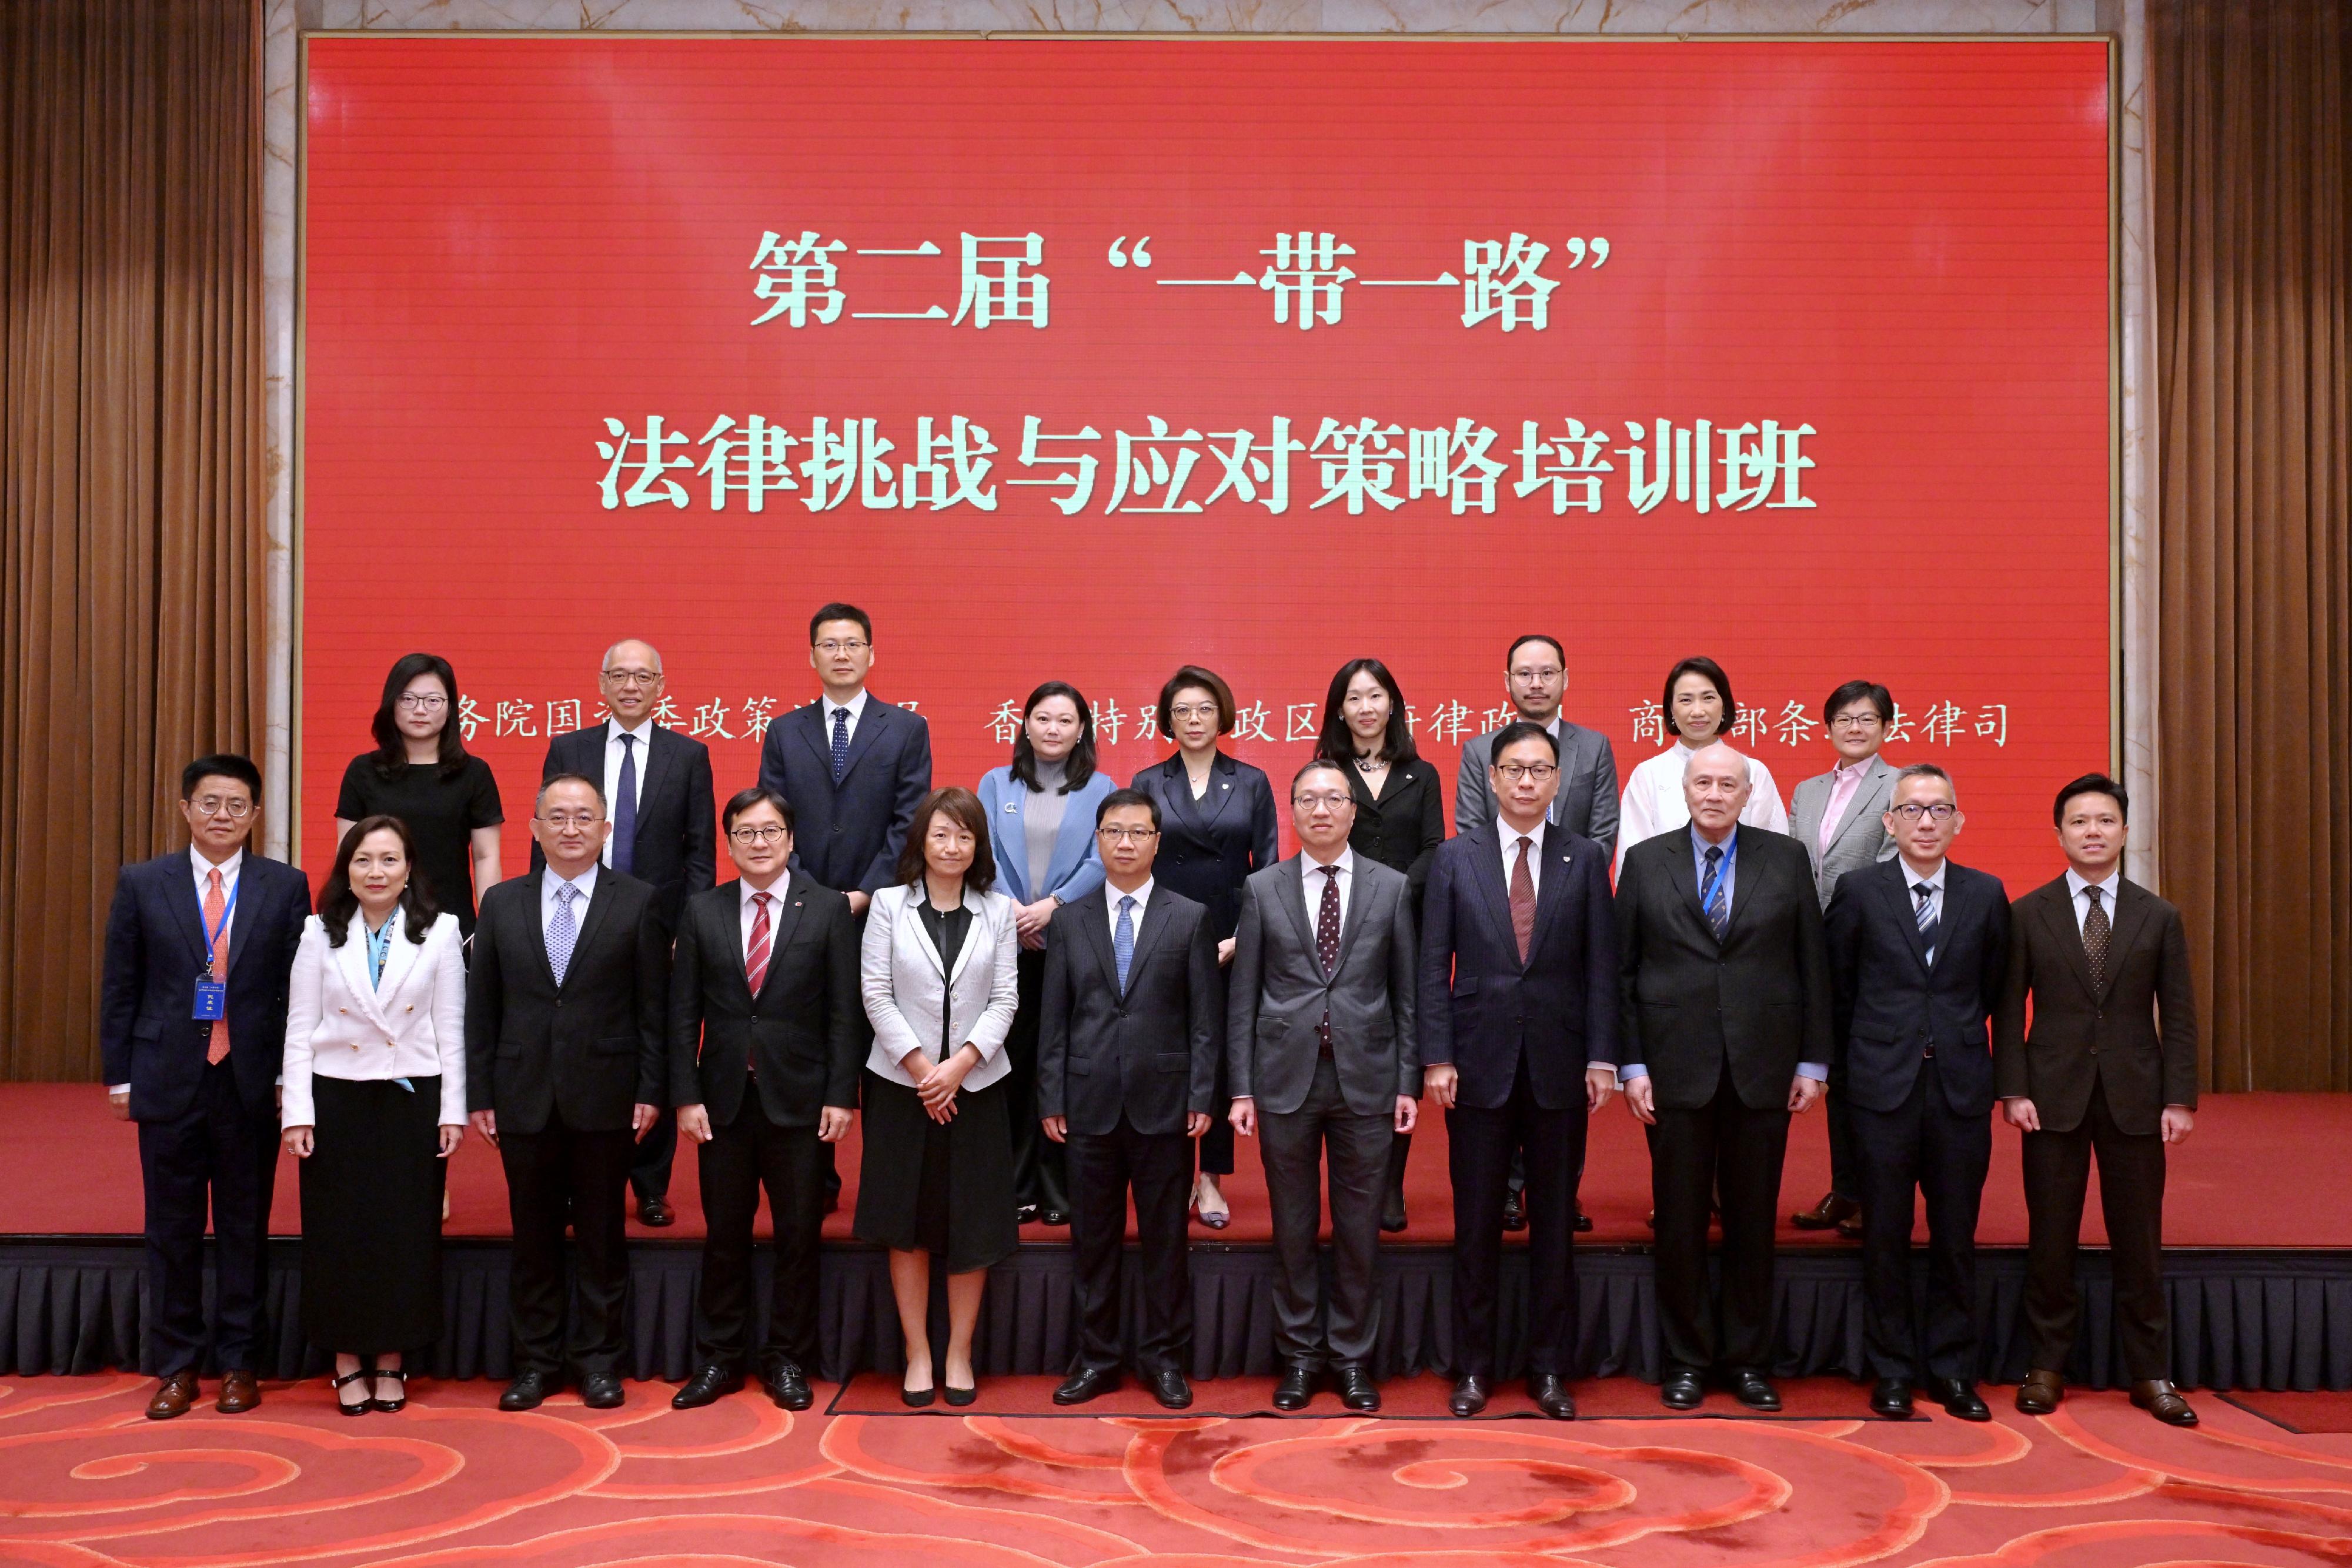 The Secretary for Justice, Mr Paul Lam, SC, led a Hong Kong legal and dispute resolution sector delegation to attend the second seminar on the legal challenges and coping strategies under the Belt and Road Initiative organised by the State-owned Assets Supervision and Administration Commission of the State Council (SASAC) and co-organised by the Department of Treaty and Law of the Ministry of Commerce and the Department of Justice today (August 25) in Beijing. Photo shows Mr Lam (front row, fifth right) with the Director of the Bureau of Policies, Laws and Regulations of the SASAC, Mr Lin Qingmiao (front row, sixth left); Deputy Director of the Bureau of Policies, Laws and Regulations of the SASAC Mr Zhu Xiaolei (front row, third left); and the Director-General of the Department of Treaty and Law of the Ministry of Commerce, Ms Li Yongjie (front row, fifth left), as well as the Chairman of the Hong Kong Bar Association, Mr Victor Dawes, SC (front row, fourth right), the President of the Law Society of Hong Kong, Mr Chan Chak-ming (front row, fourth left), and other guests at the event.